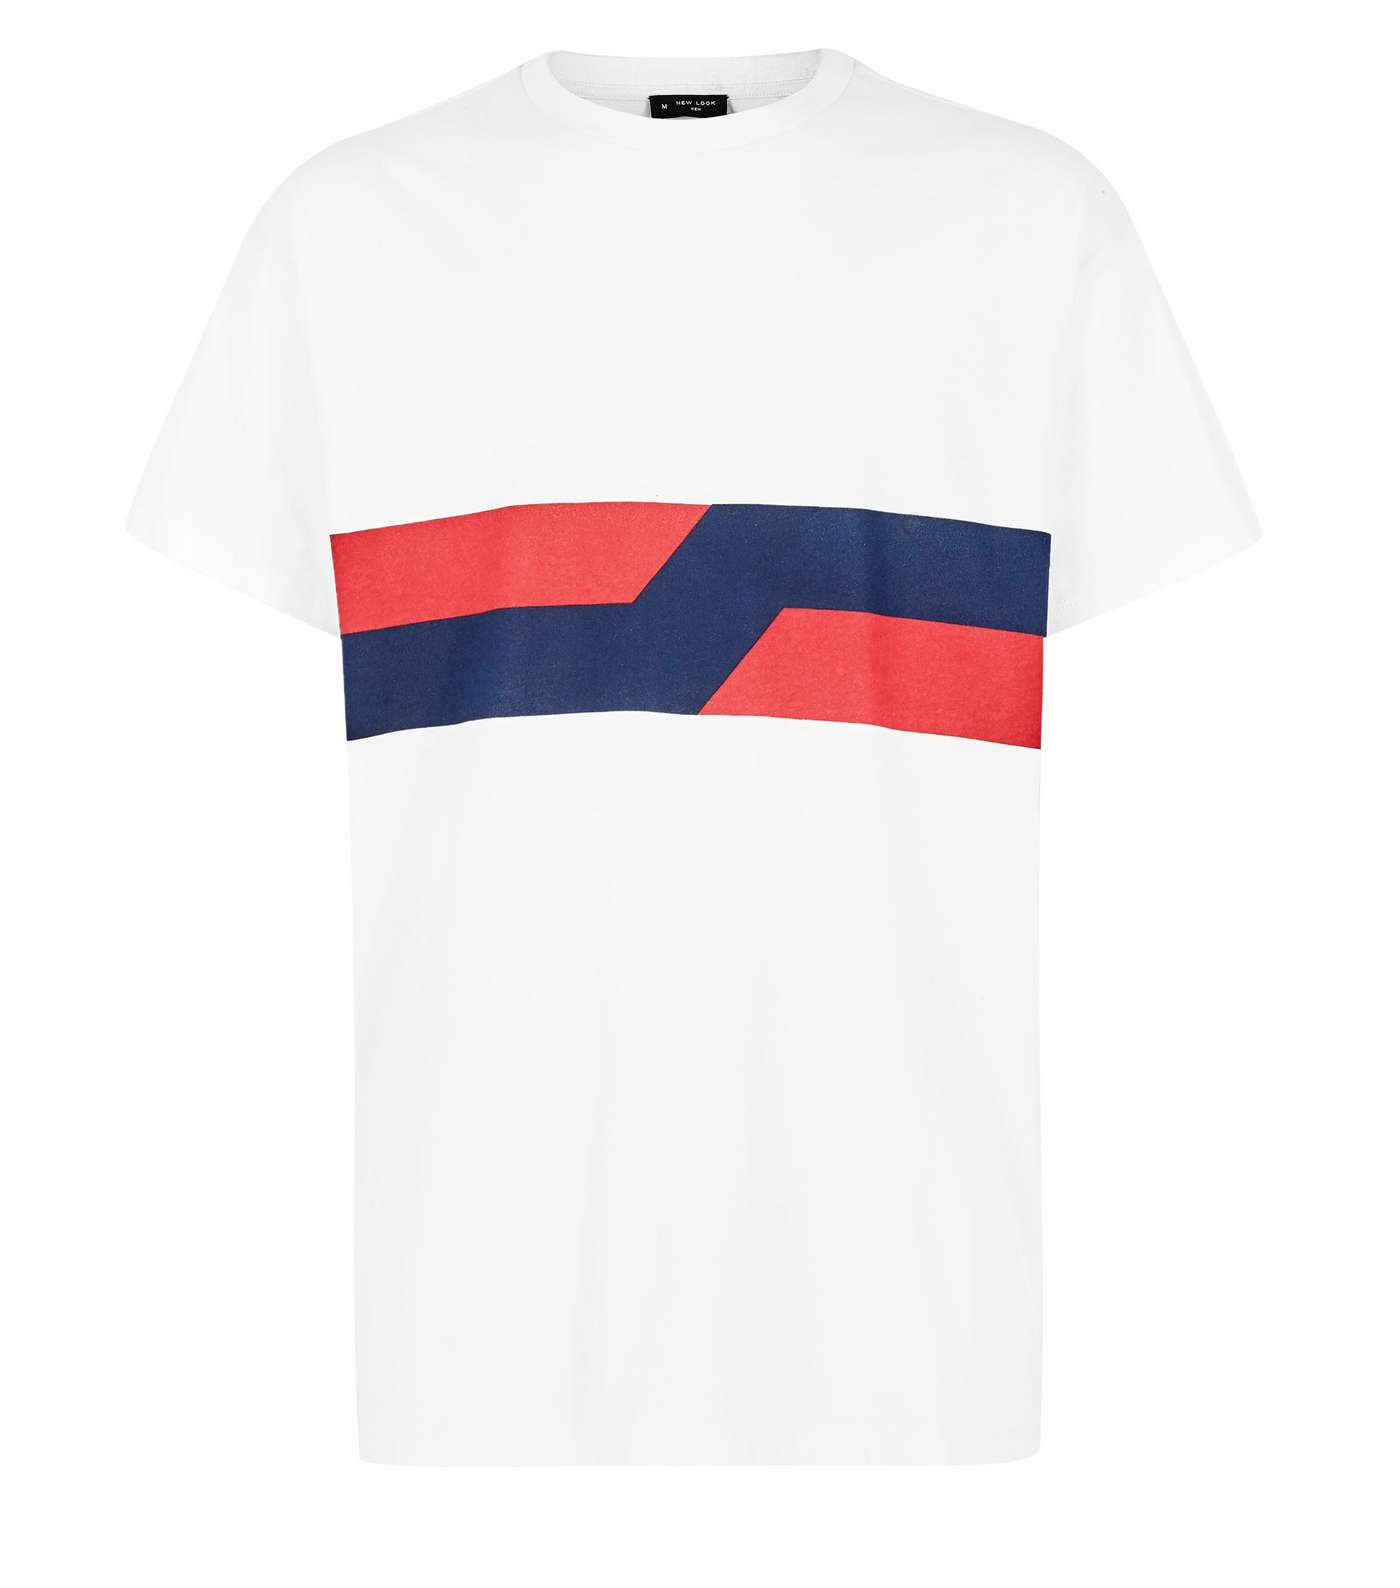 White Contrast Panel Printed T-Shirt Image 4